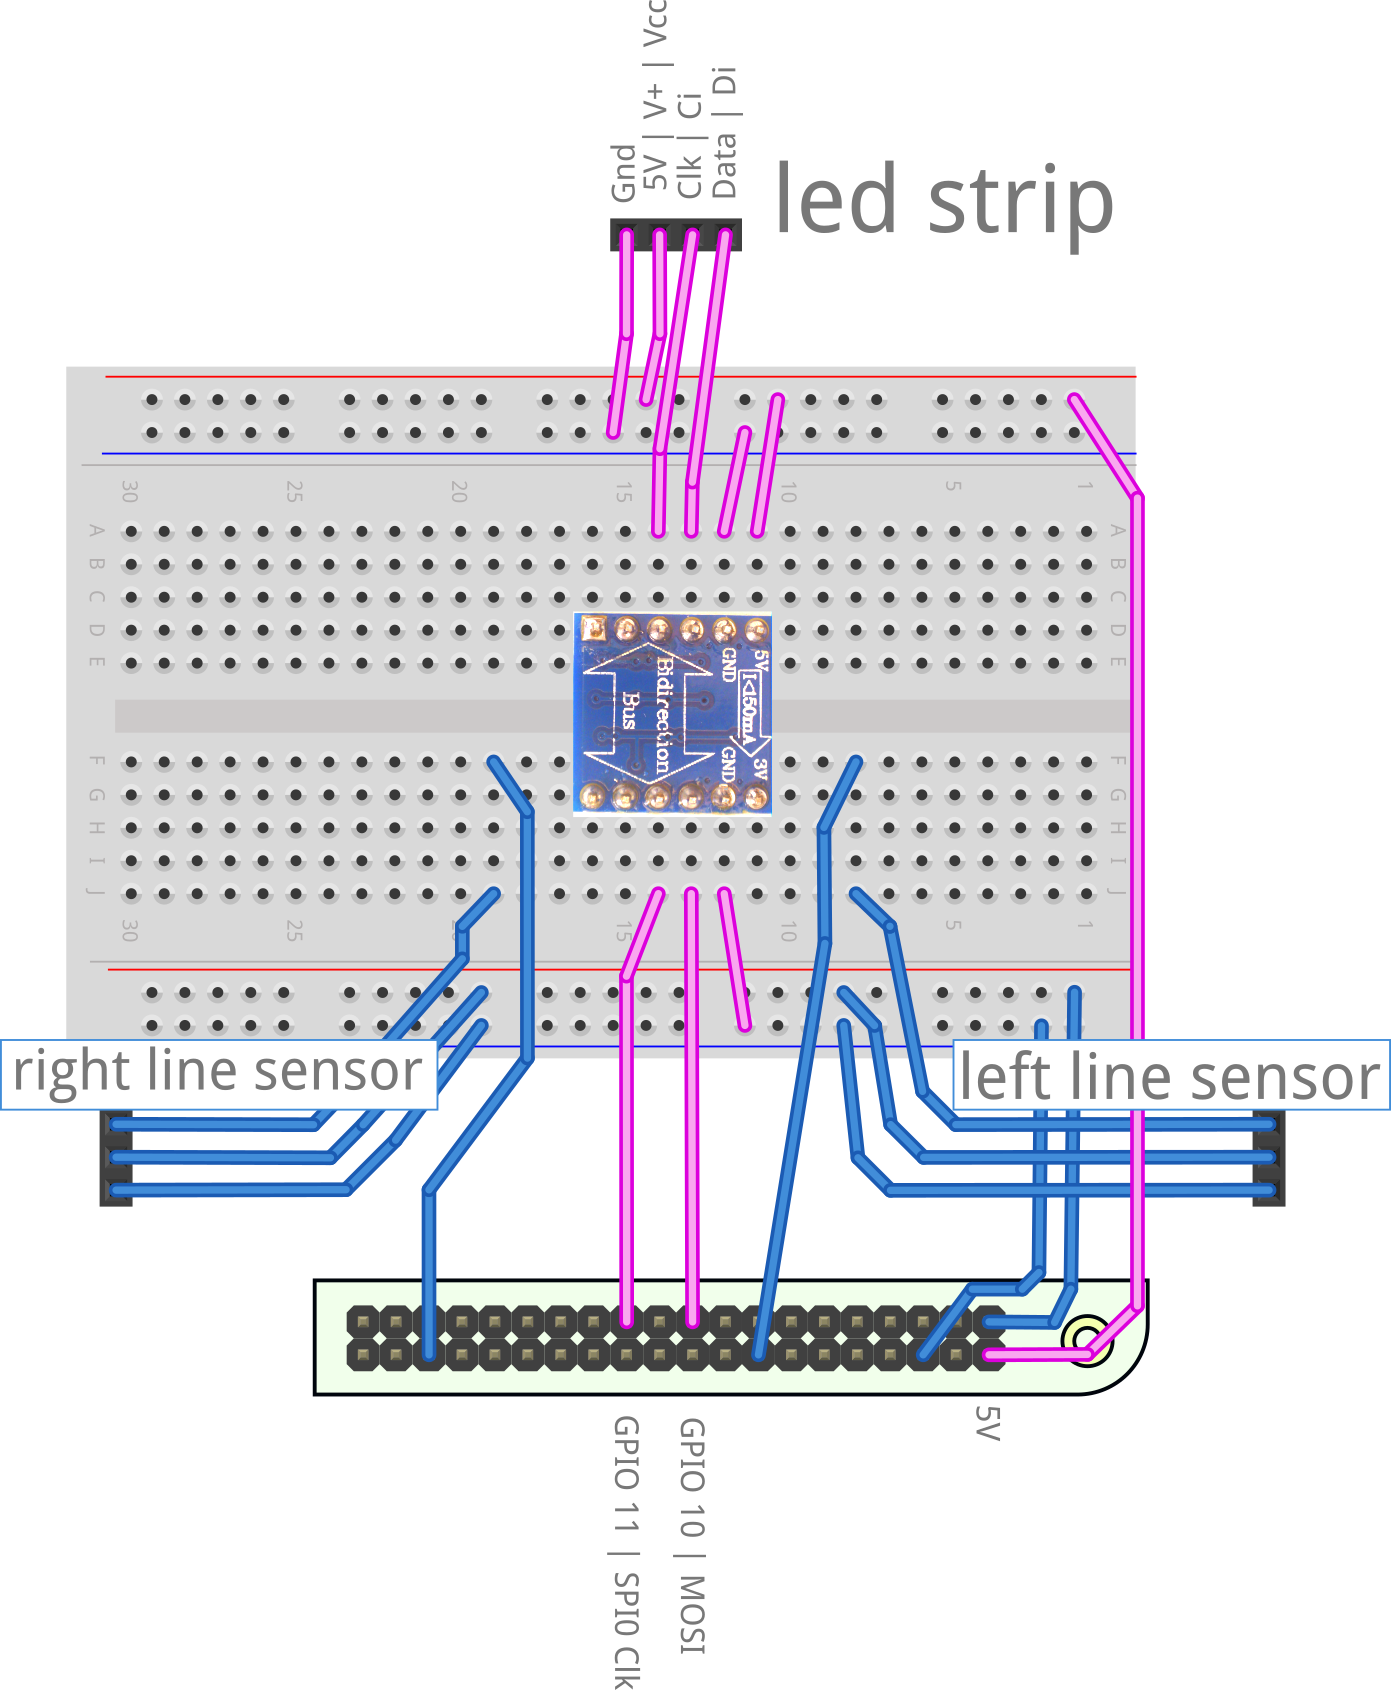 The corrected breadboard picture for connecting LED's to Raspberry Pi 3b+